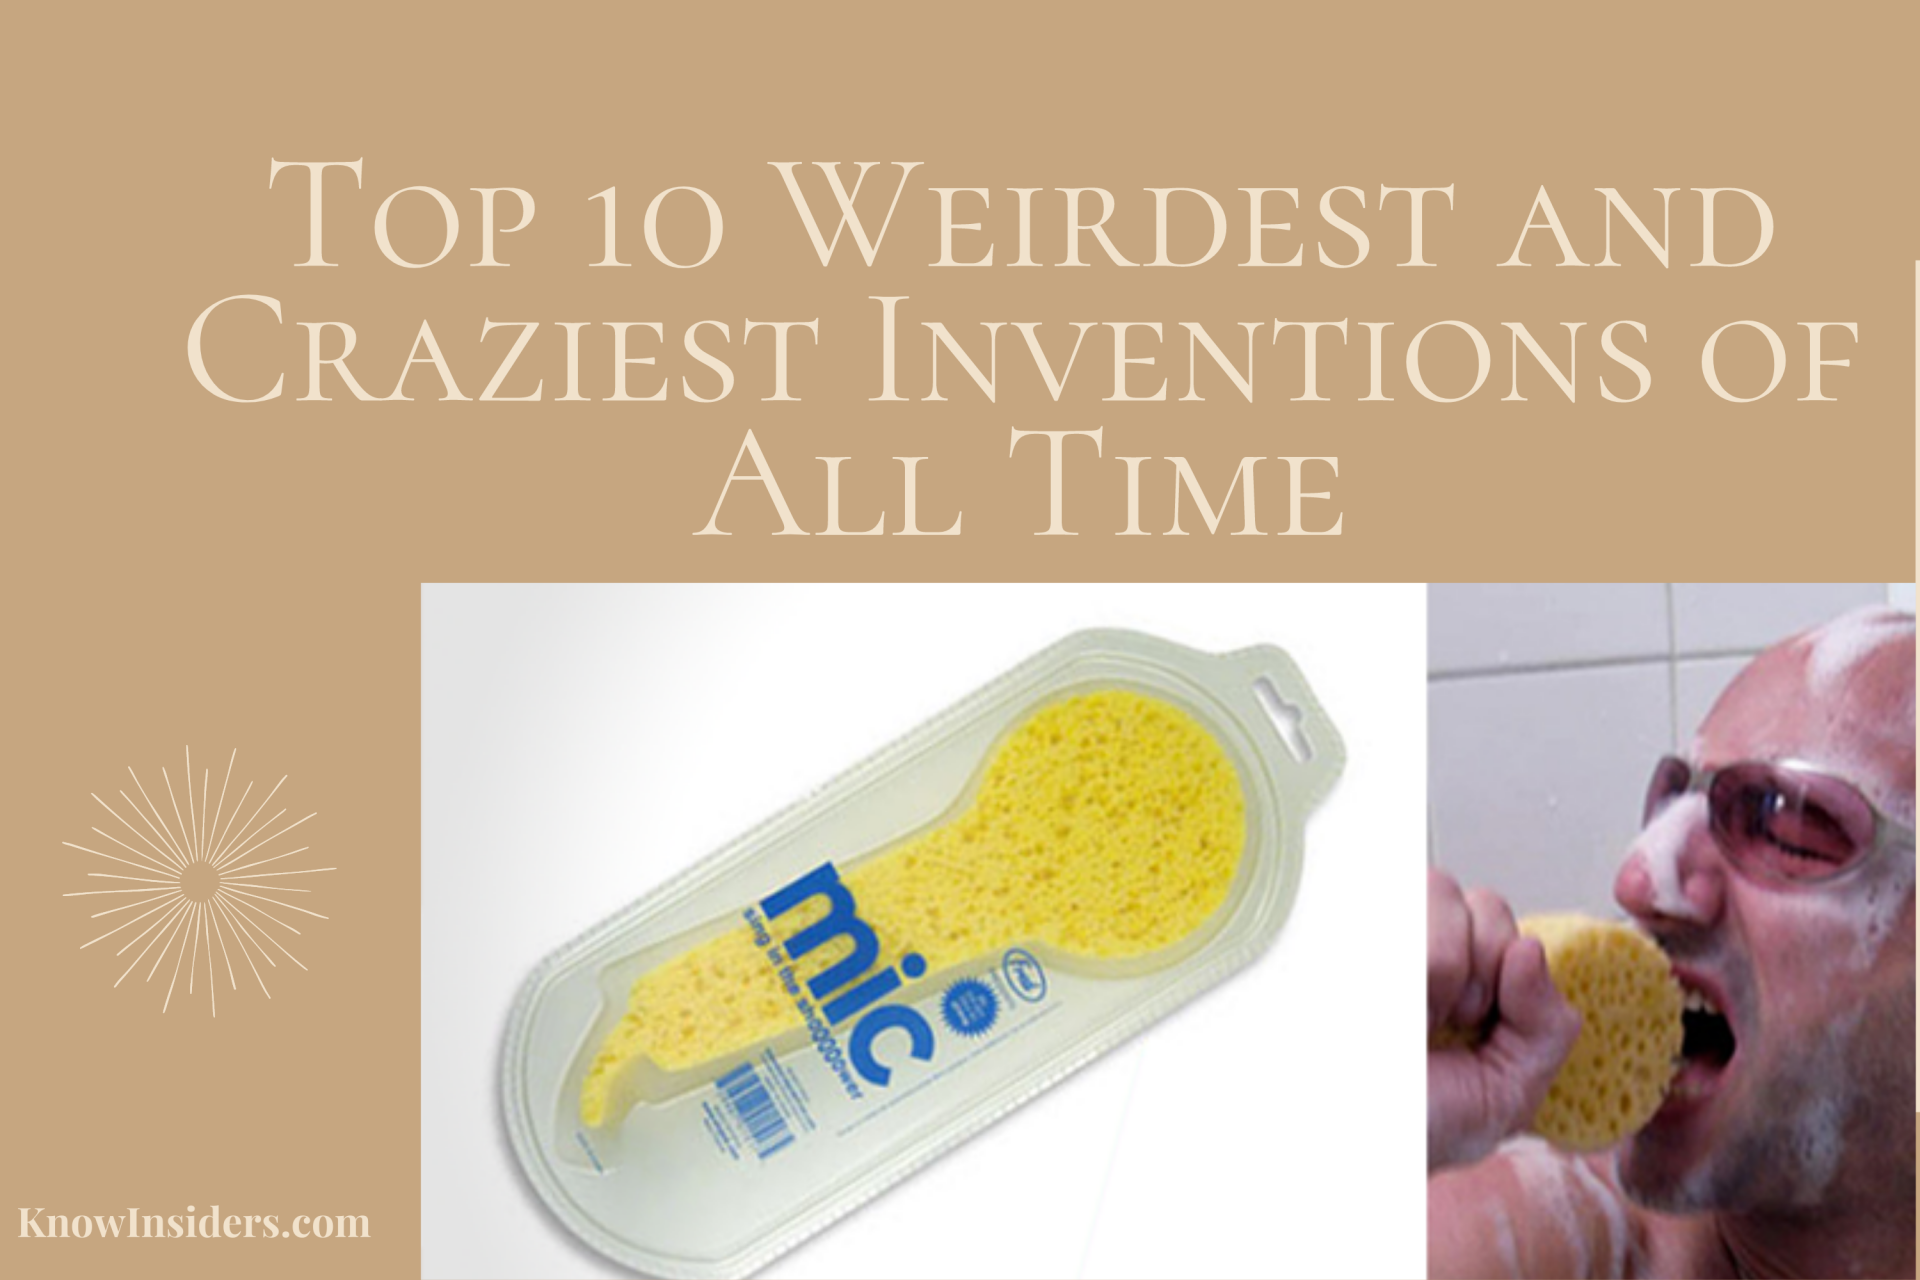 Top 10 Weirdest and Craziest Inventions of All Time